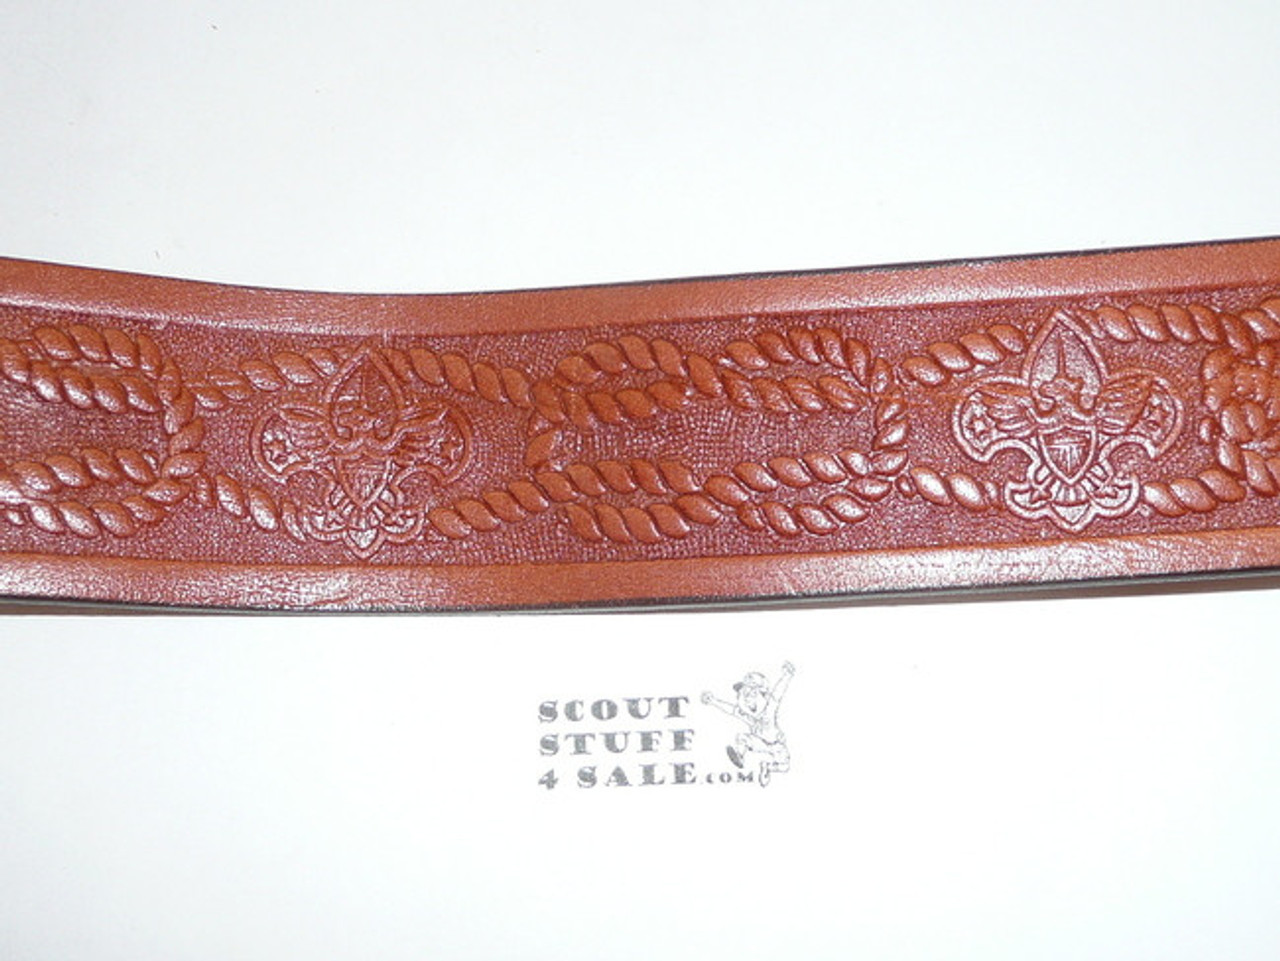 Official Boy Scout Tooled Leather Belt, 32" waist, lite use